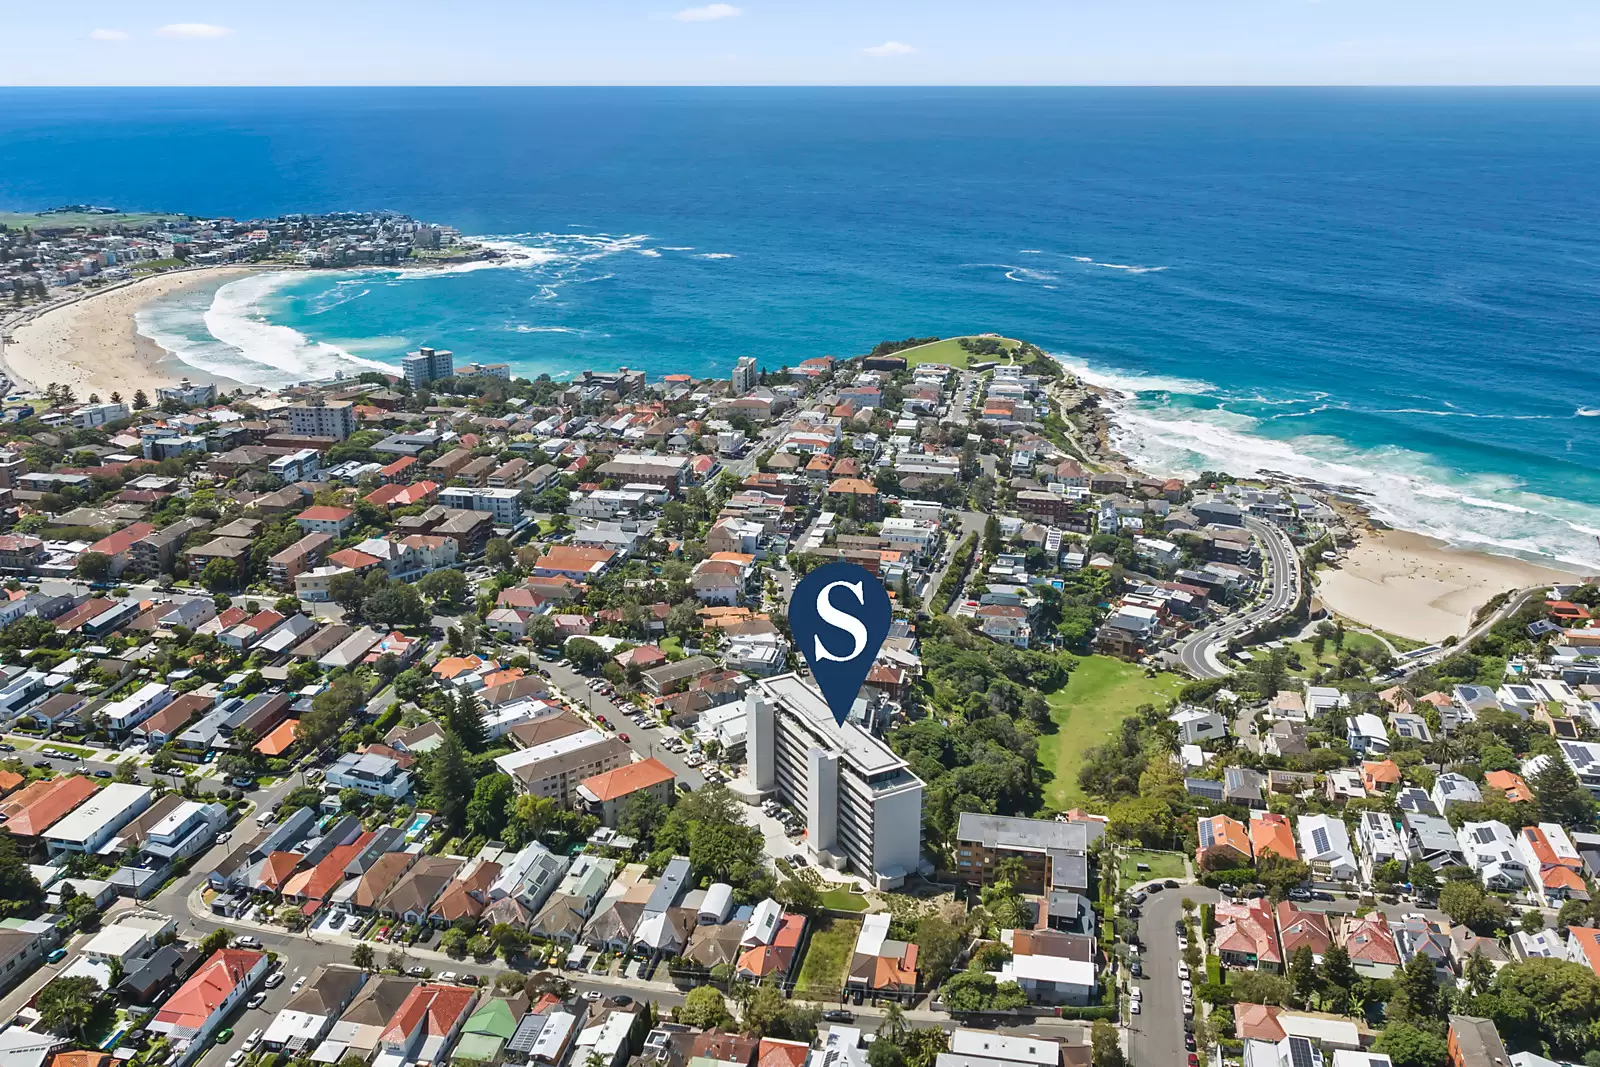 Penthouse 1 & 2 / Illawong Avenue, Tamarama For Sale by Sydney Sotheby's International Realty - image 21